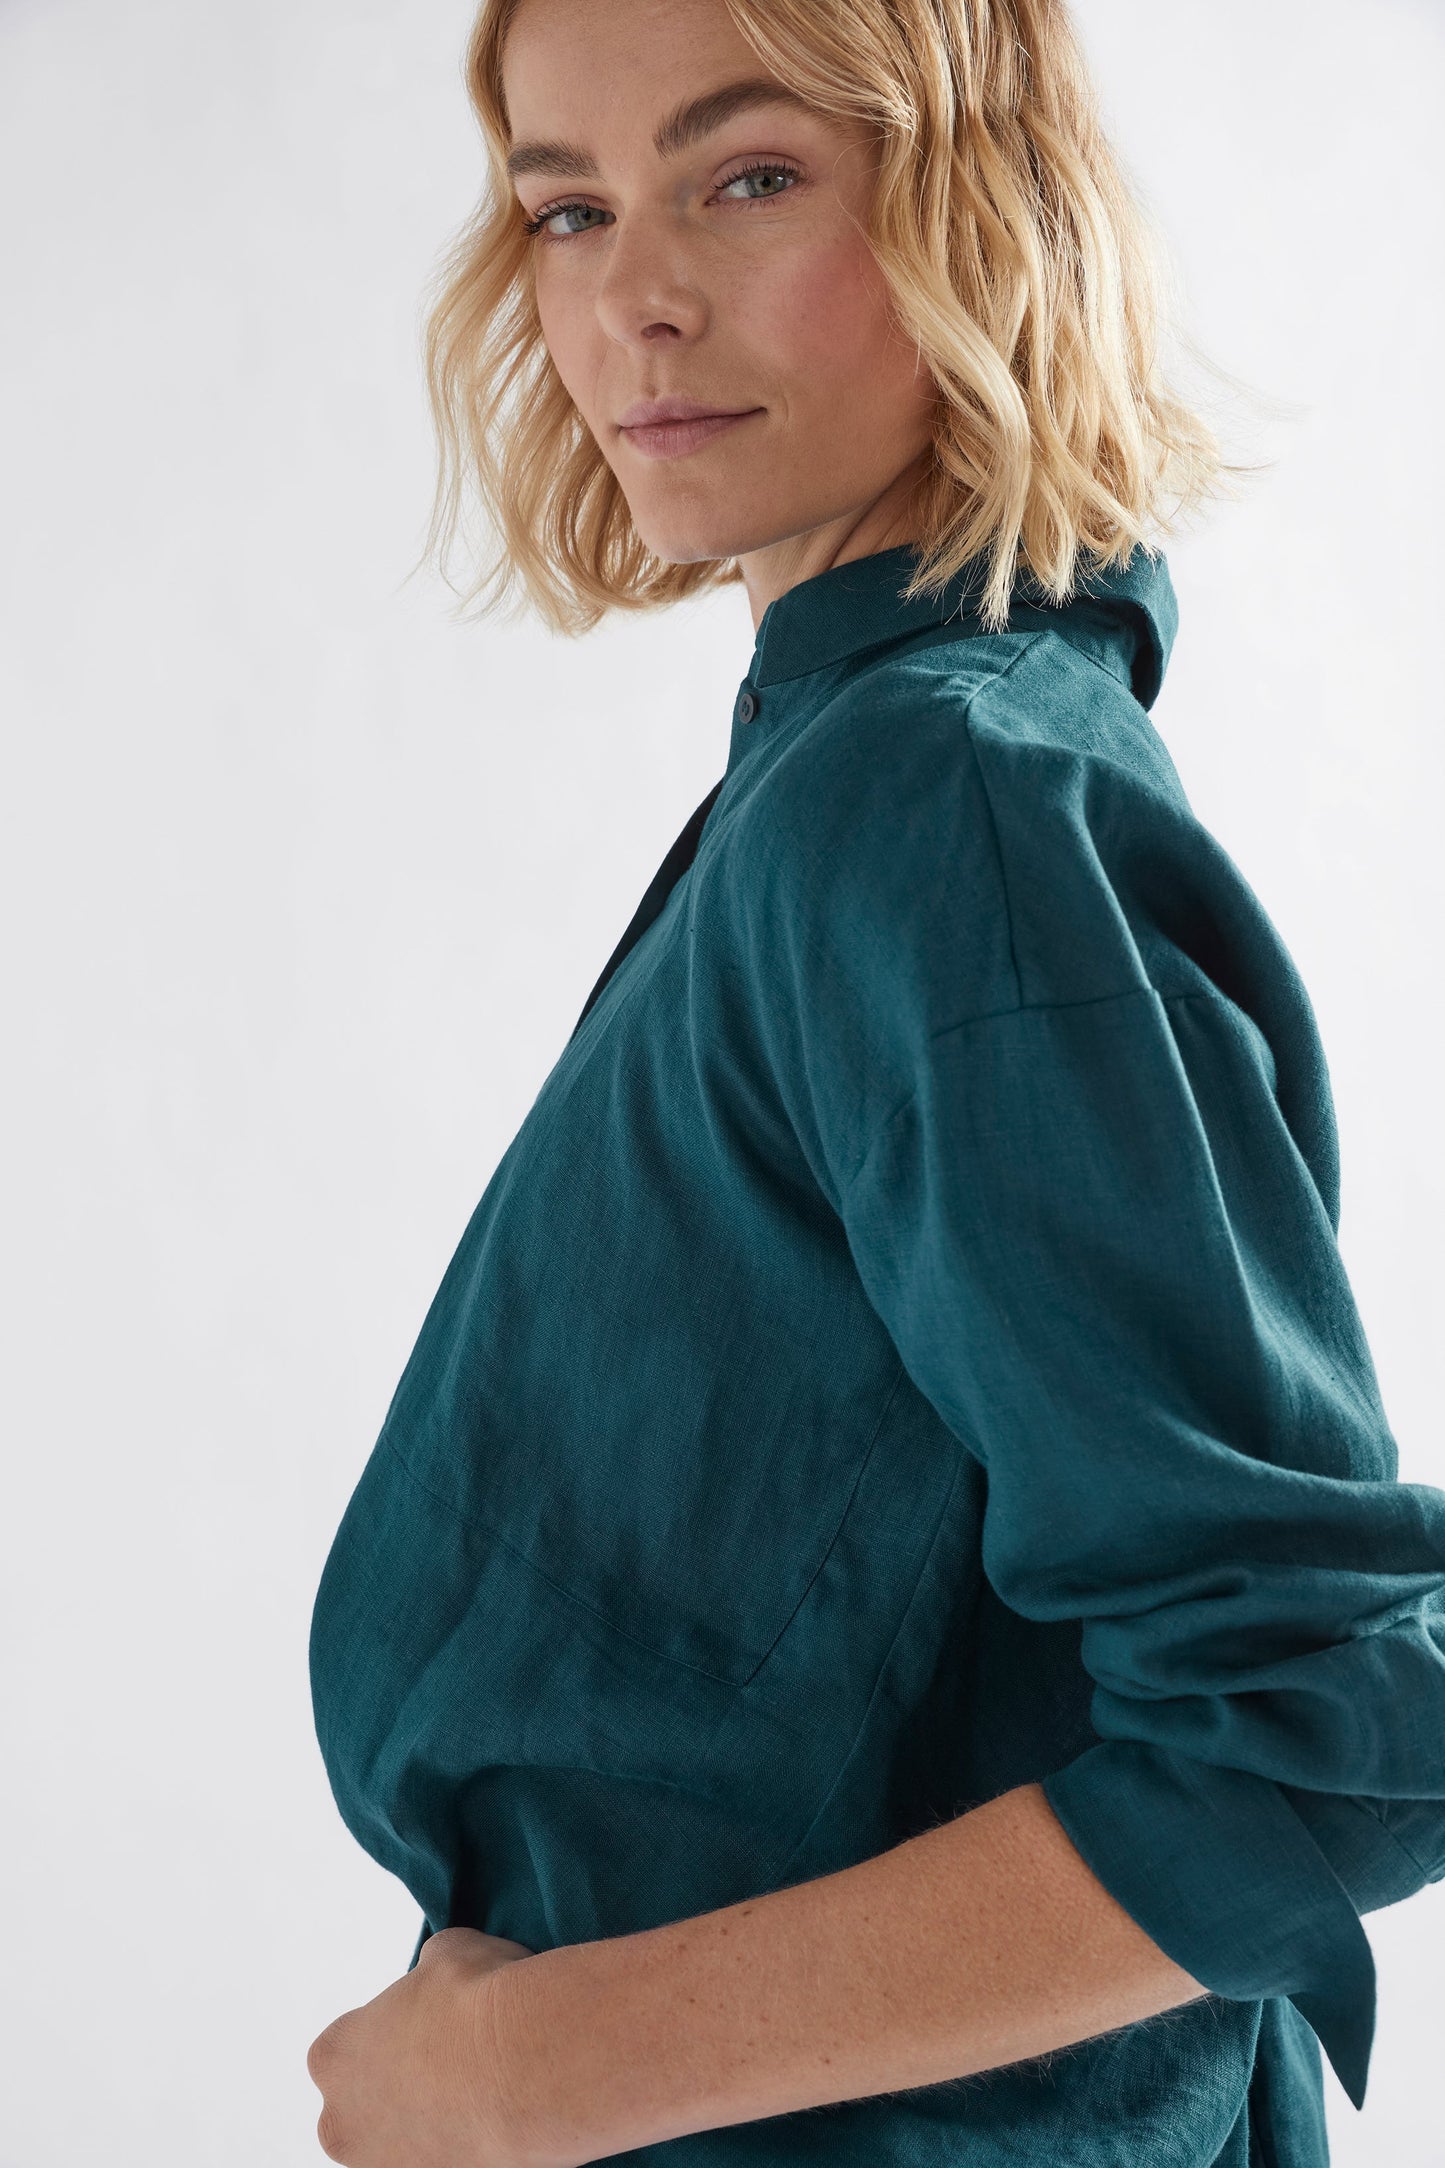 Stilla Linen Shirt with High-Low Hem and Back Pleat Detail Model side | PEACOCK